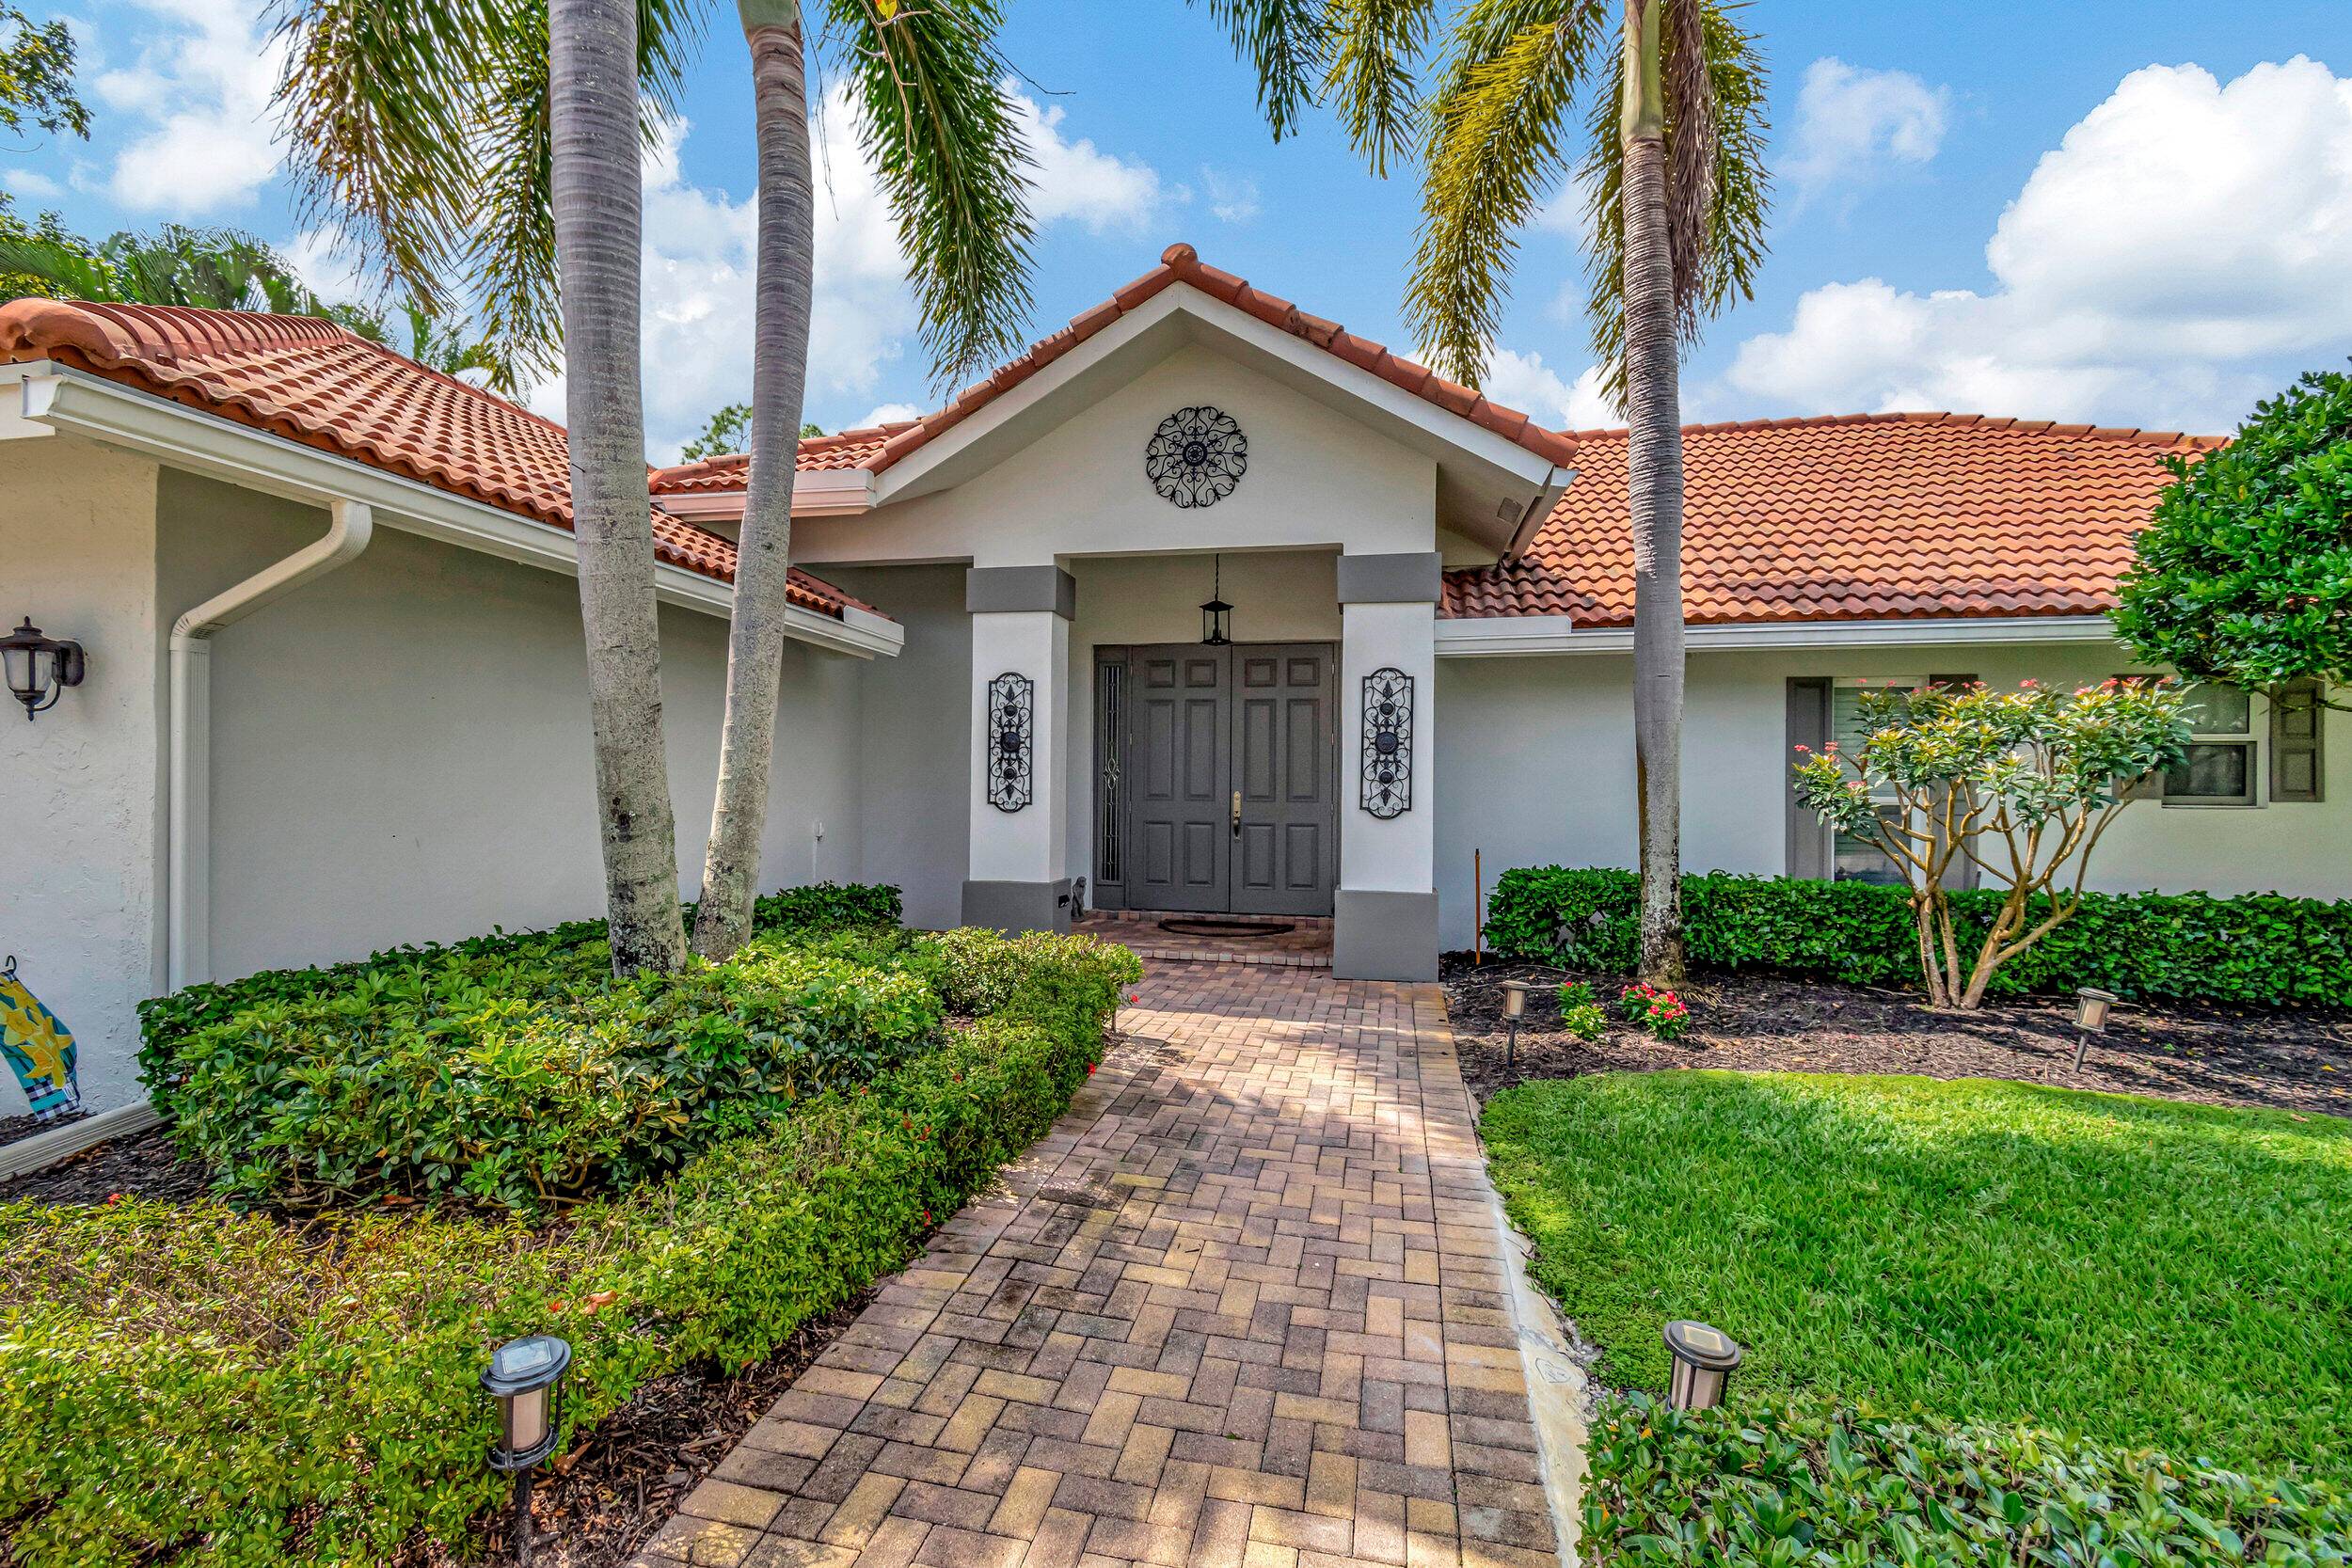 DELRAY DUNES GOLF AND COUNTRY CLUBFeaturing an 18 hole Pete Dye Golf Course WATERFRONT HOMEGreat room kitchen area with large island that is perfect for entertaining.